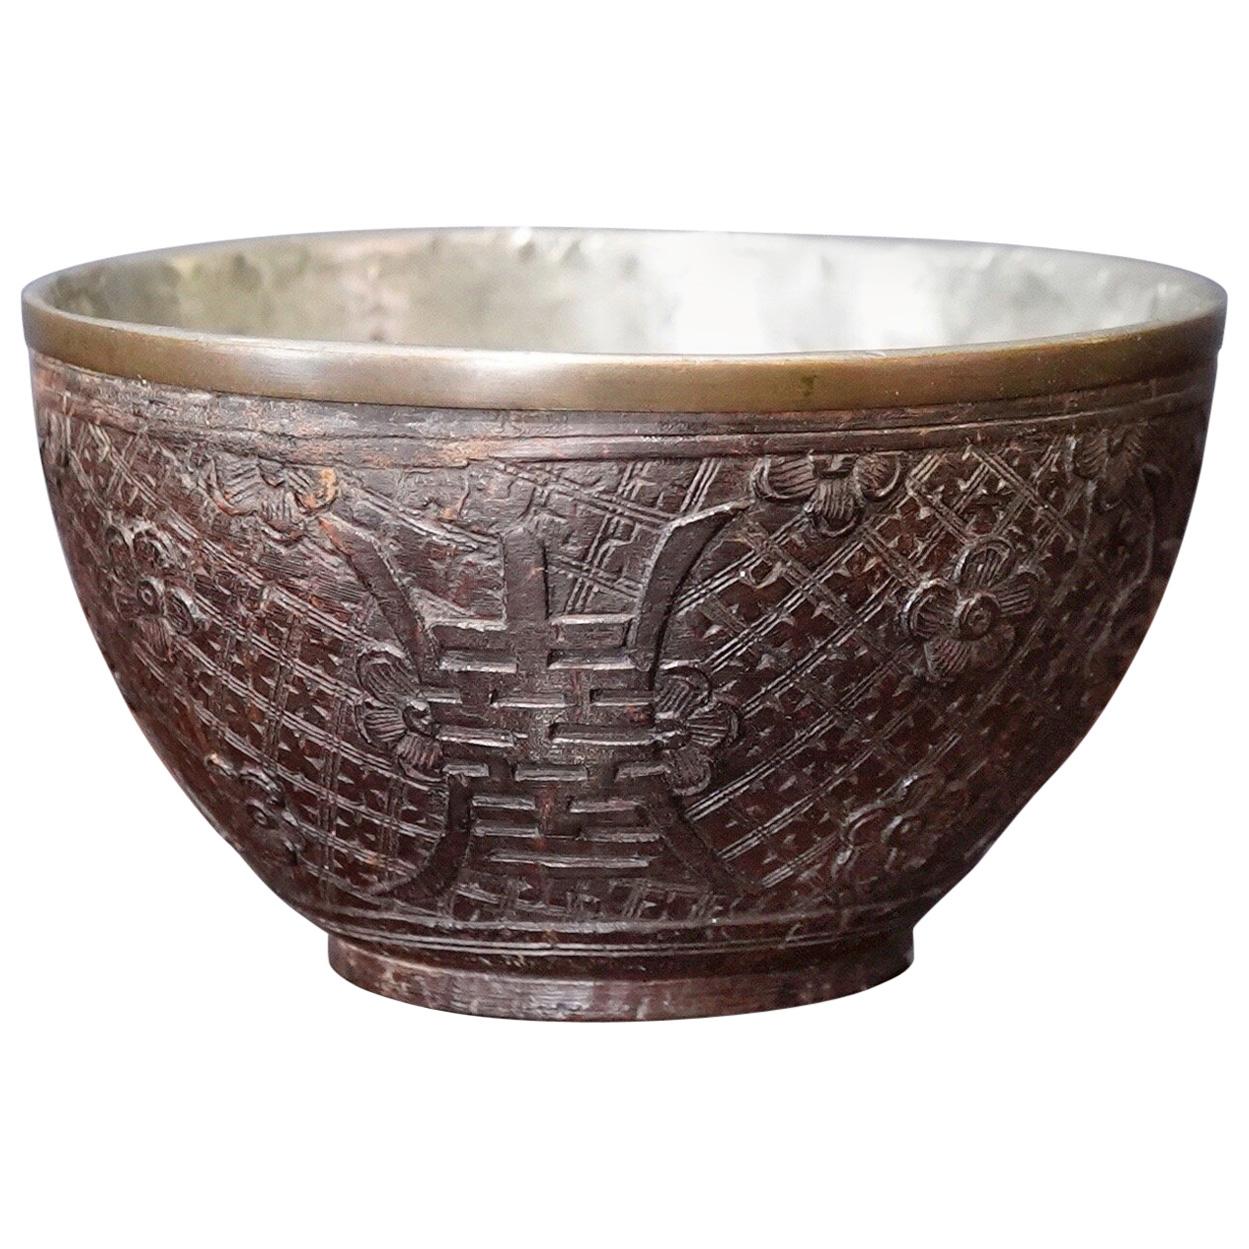 Chinese Carved Coconut Bowl, ‘Happiness’ & Prunus, 19th Century